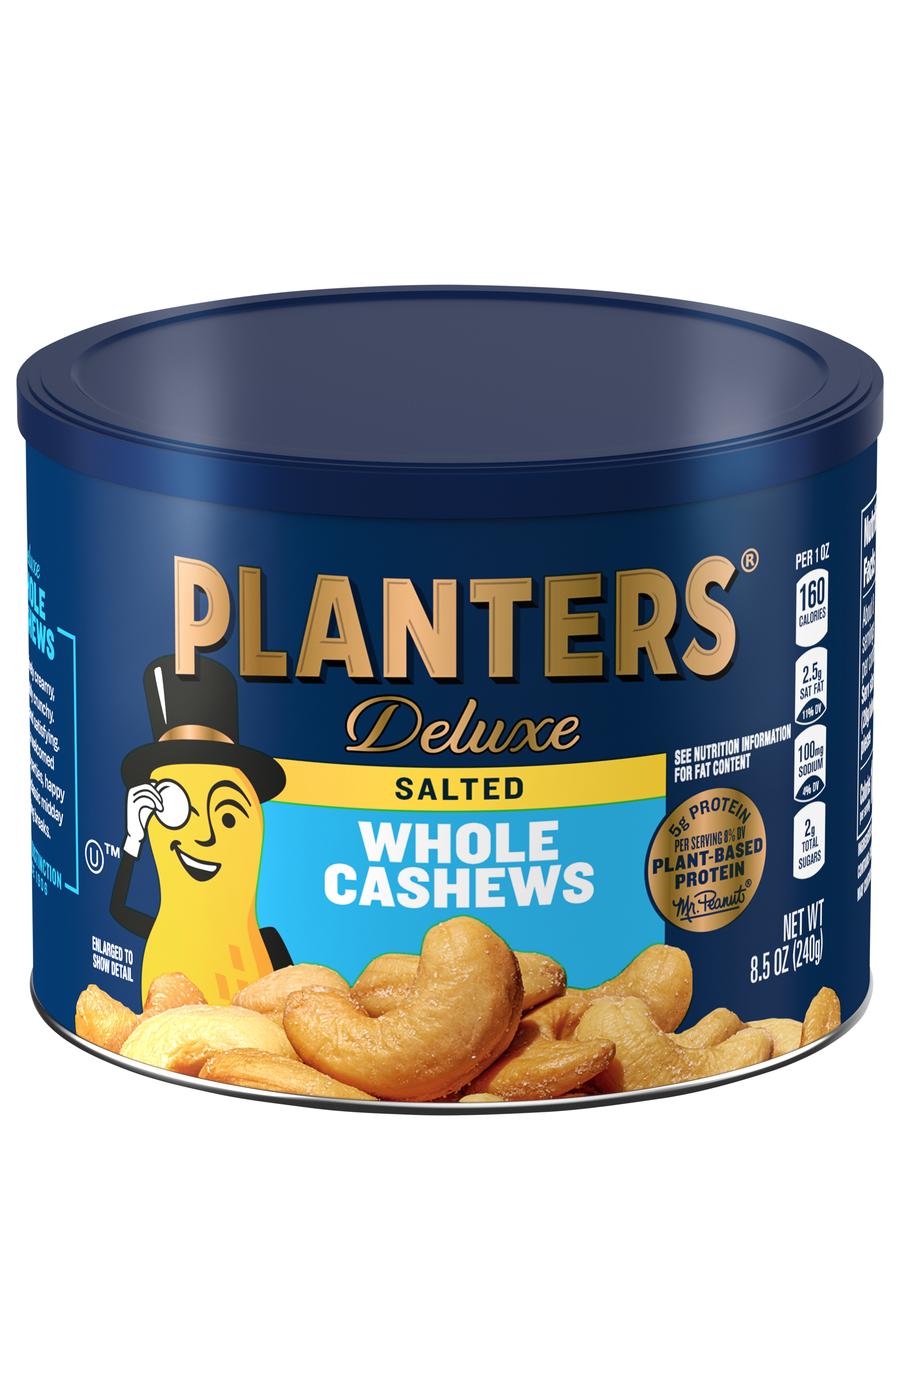 Planters Deluxe Whole Cashews; image 1 of 3